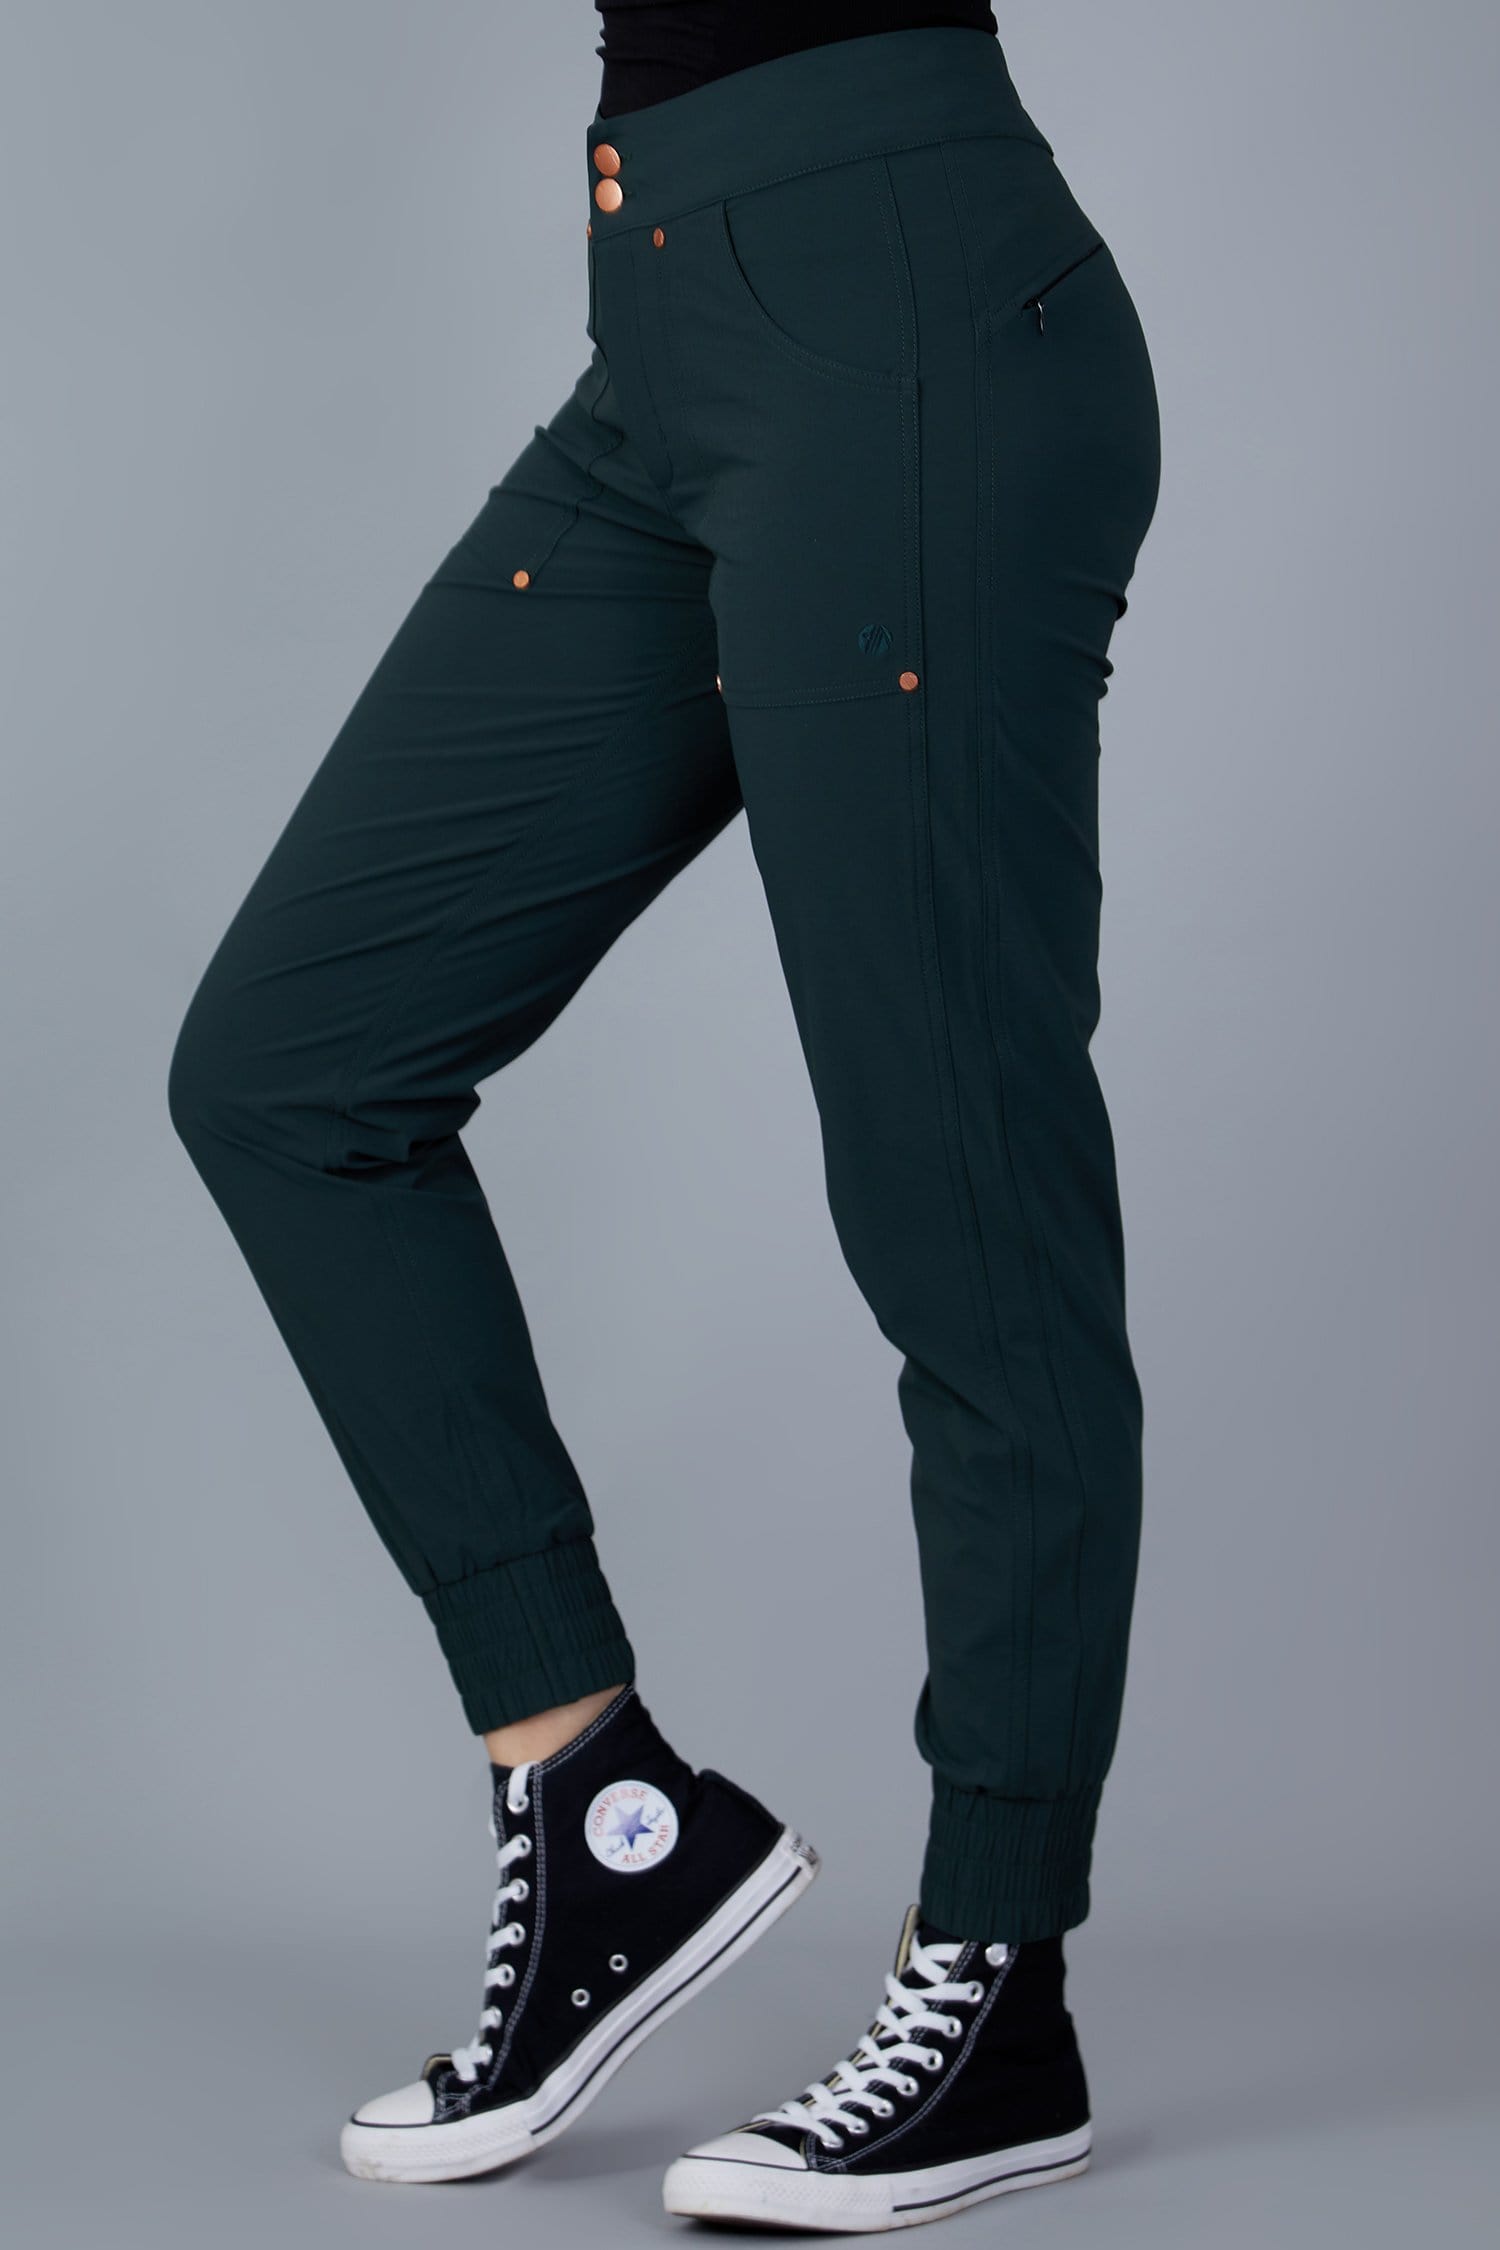 Casual Stroll Pants - Forest Green - 36r / Uk18 - Womens - Acai Outdoorwear